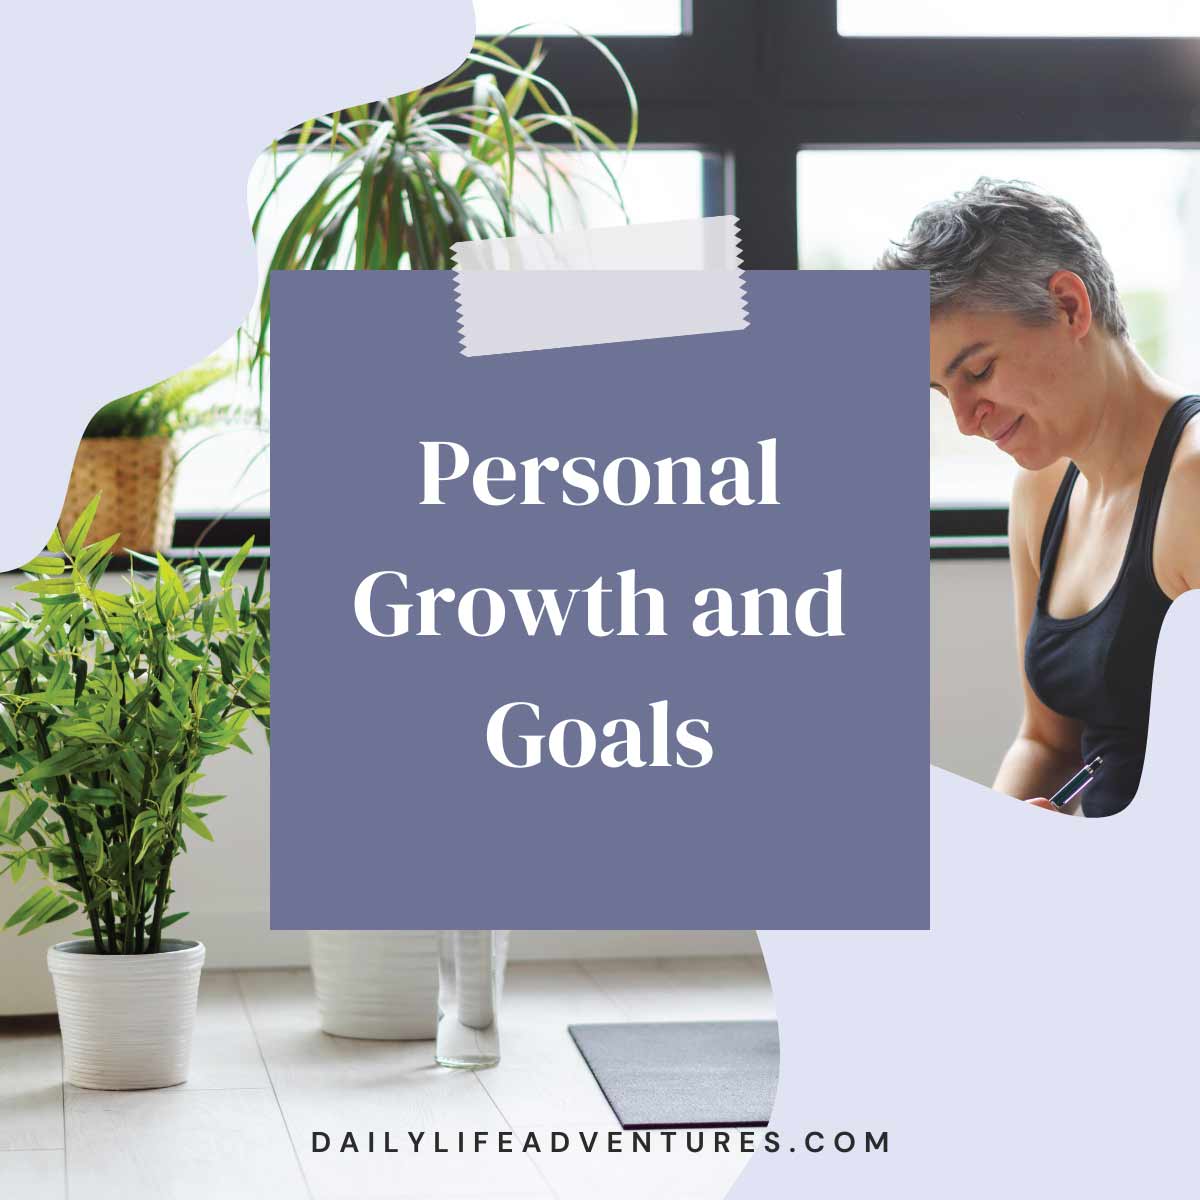 Personal Growth and Goals